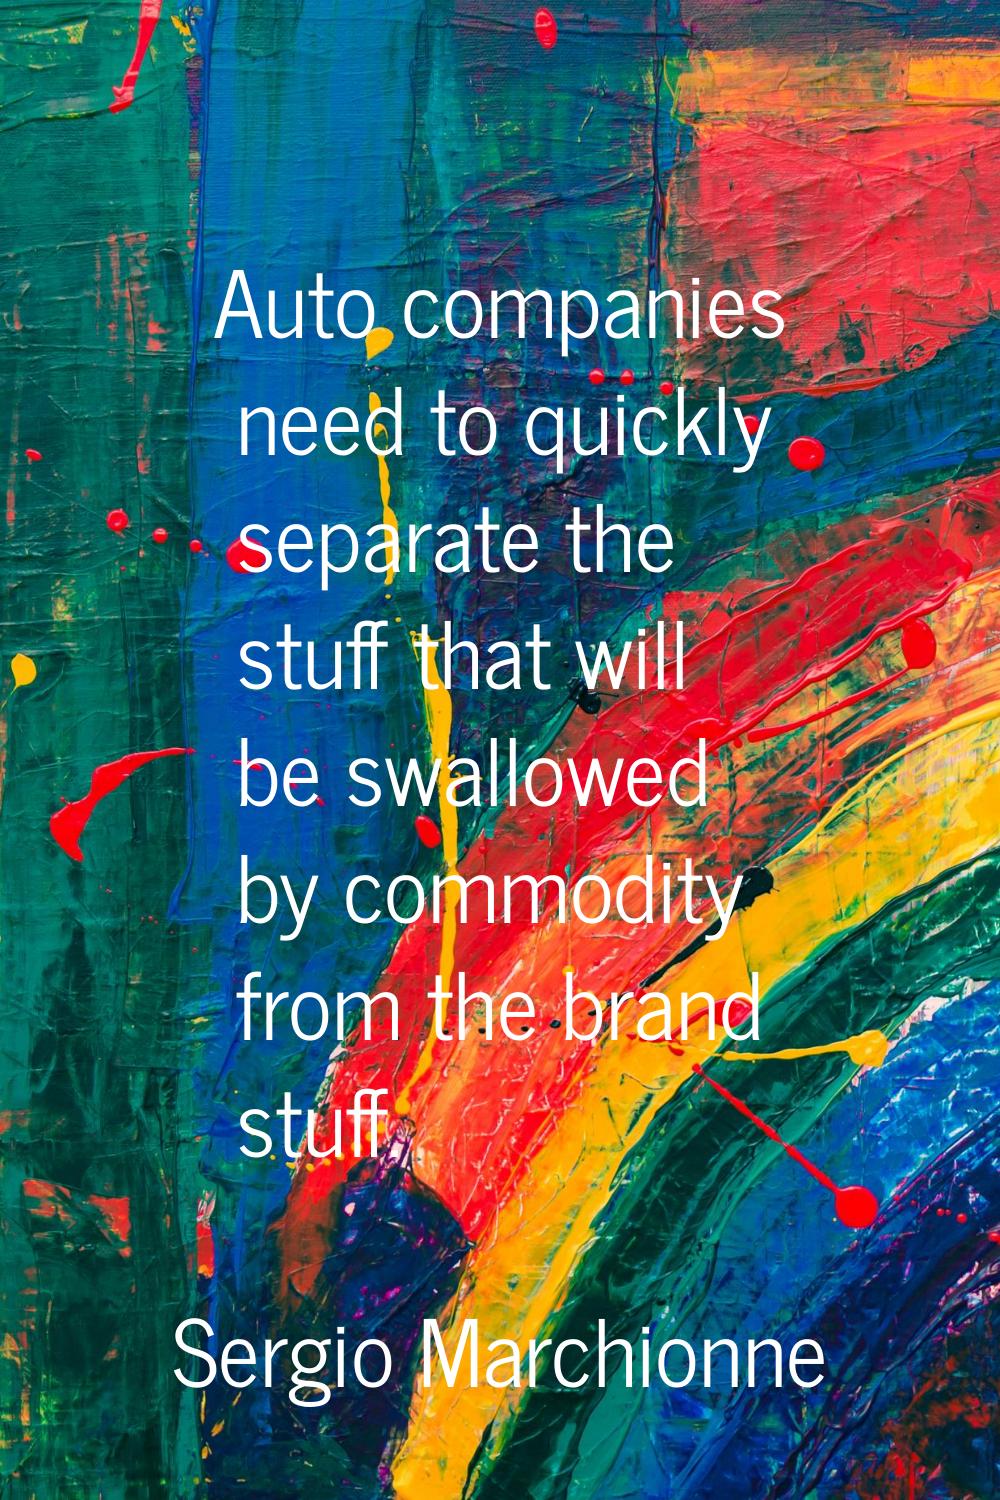 Auto companies need to quickly separate the stuff that will be swallowed by commodity from the bran